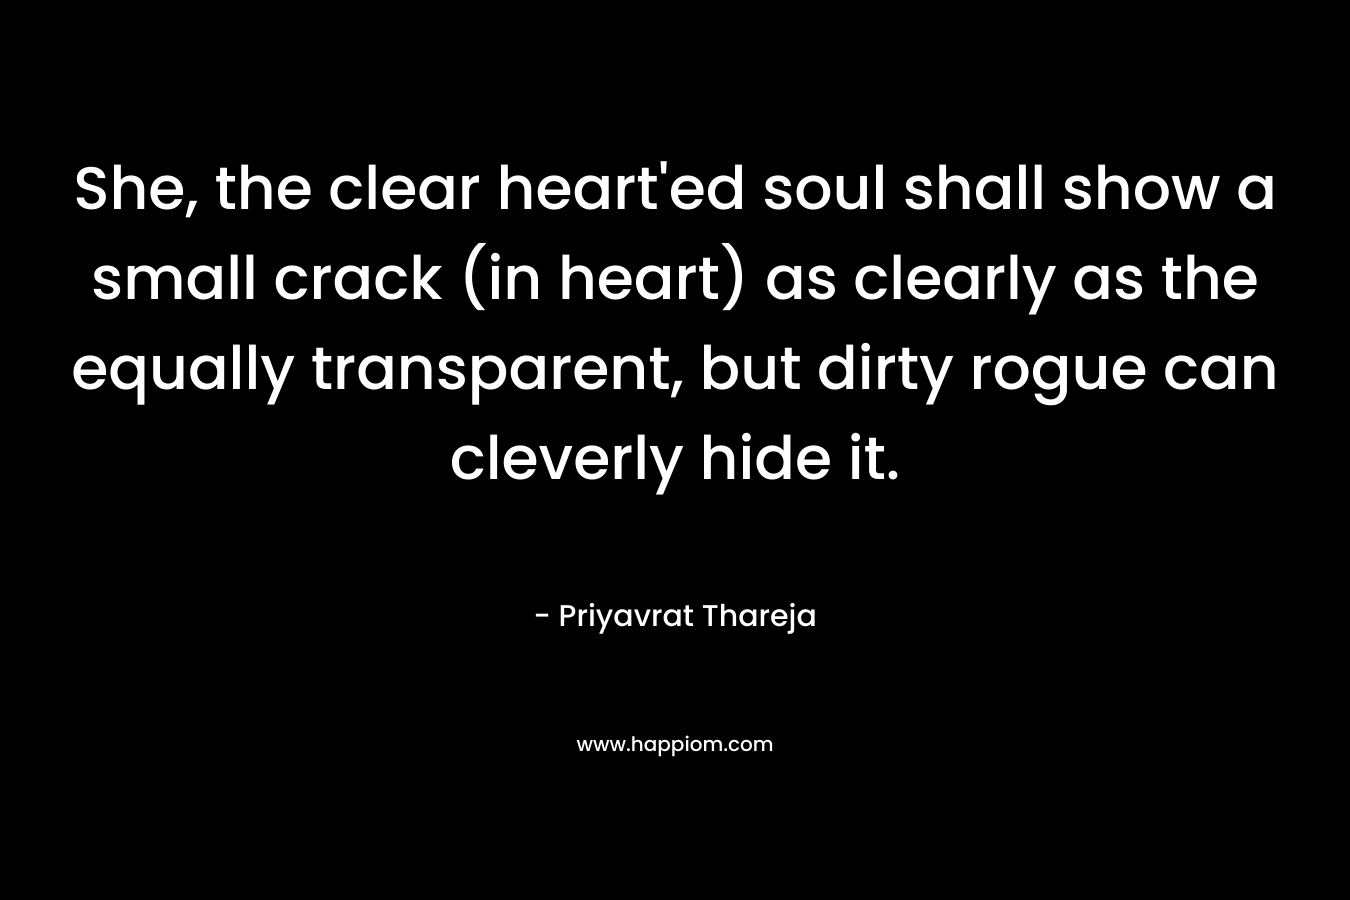 She, the clear heart’ed soul shall show a small crack (in heart) as clearly as the equally transparent, but dirty rogue can cleverly hide it. – Priyavrat Thareja